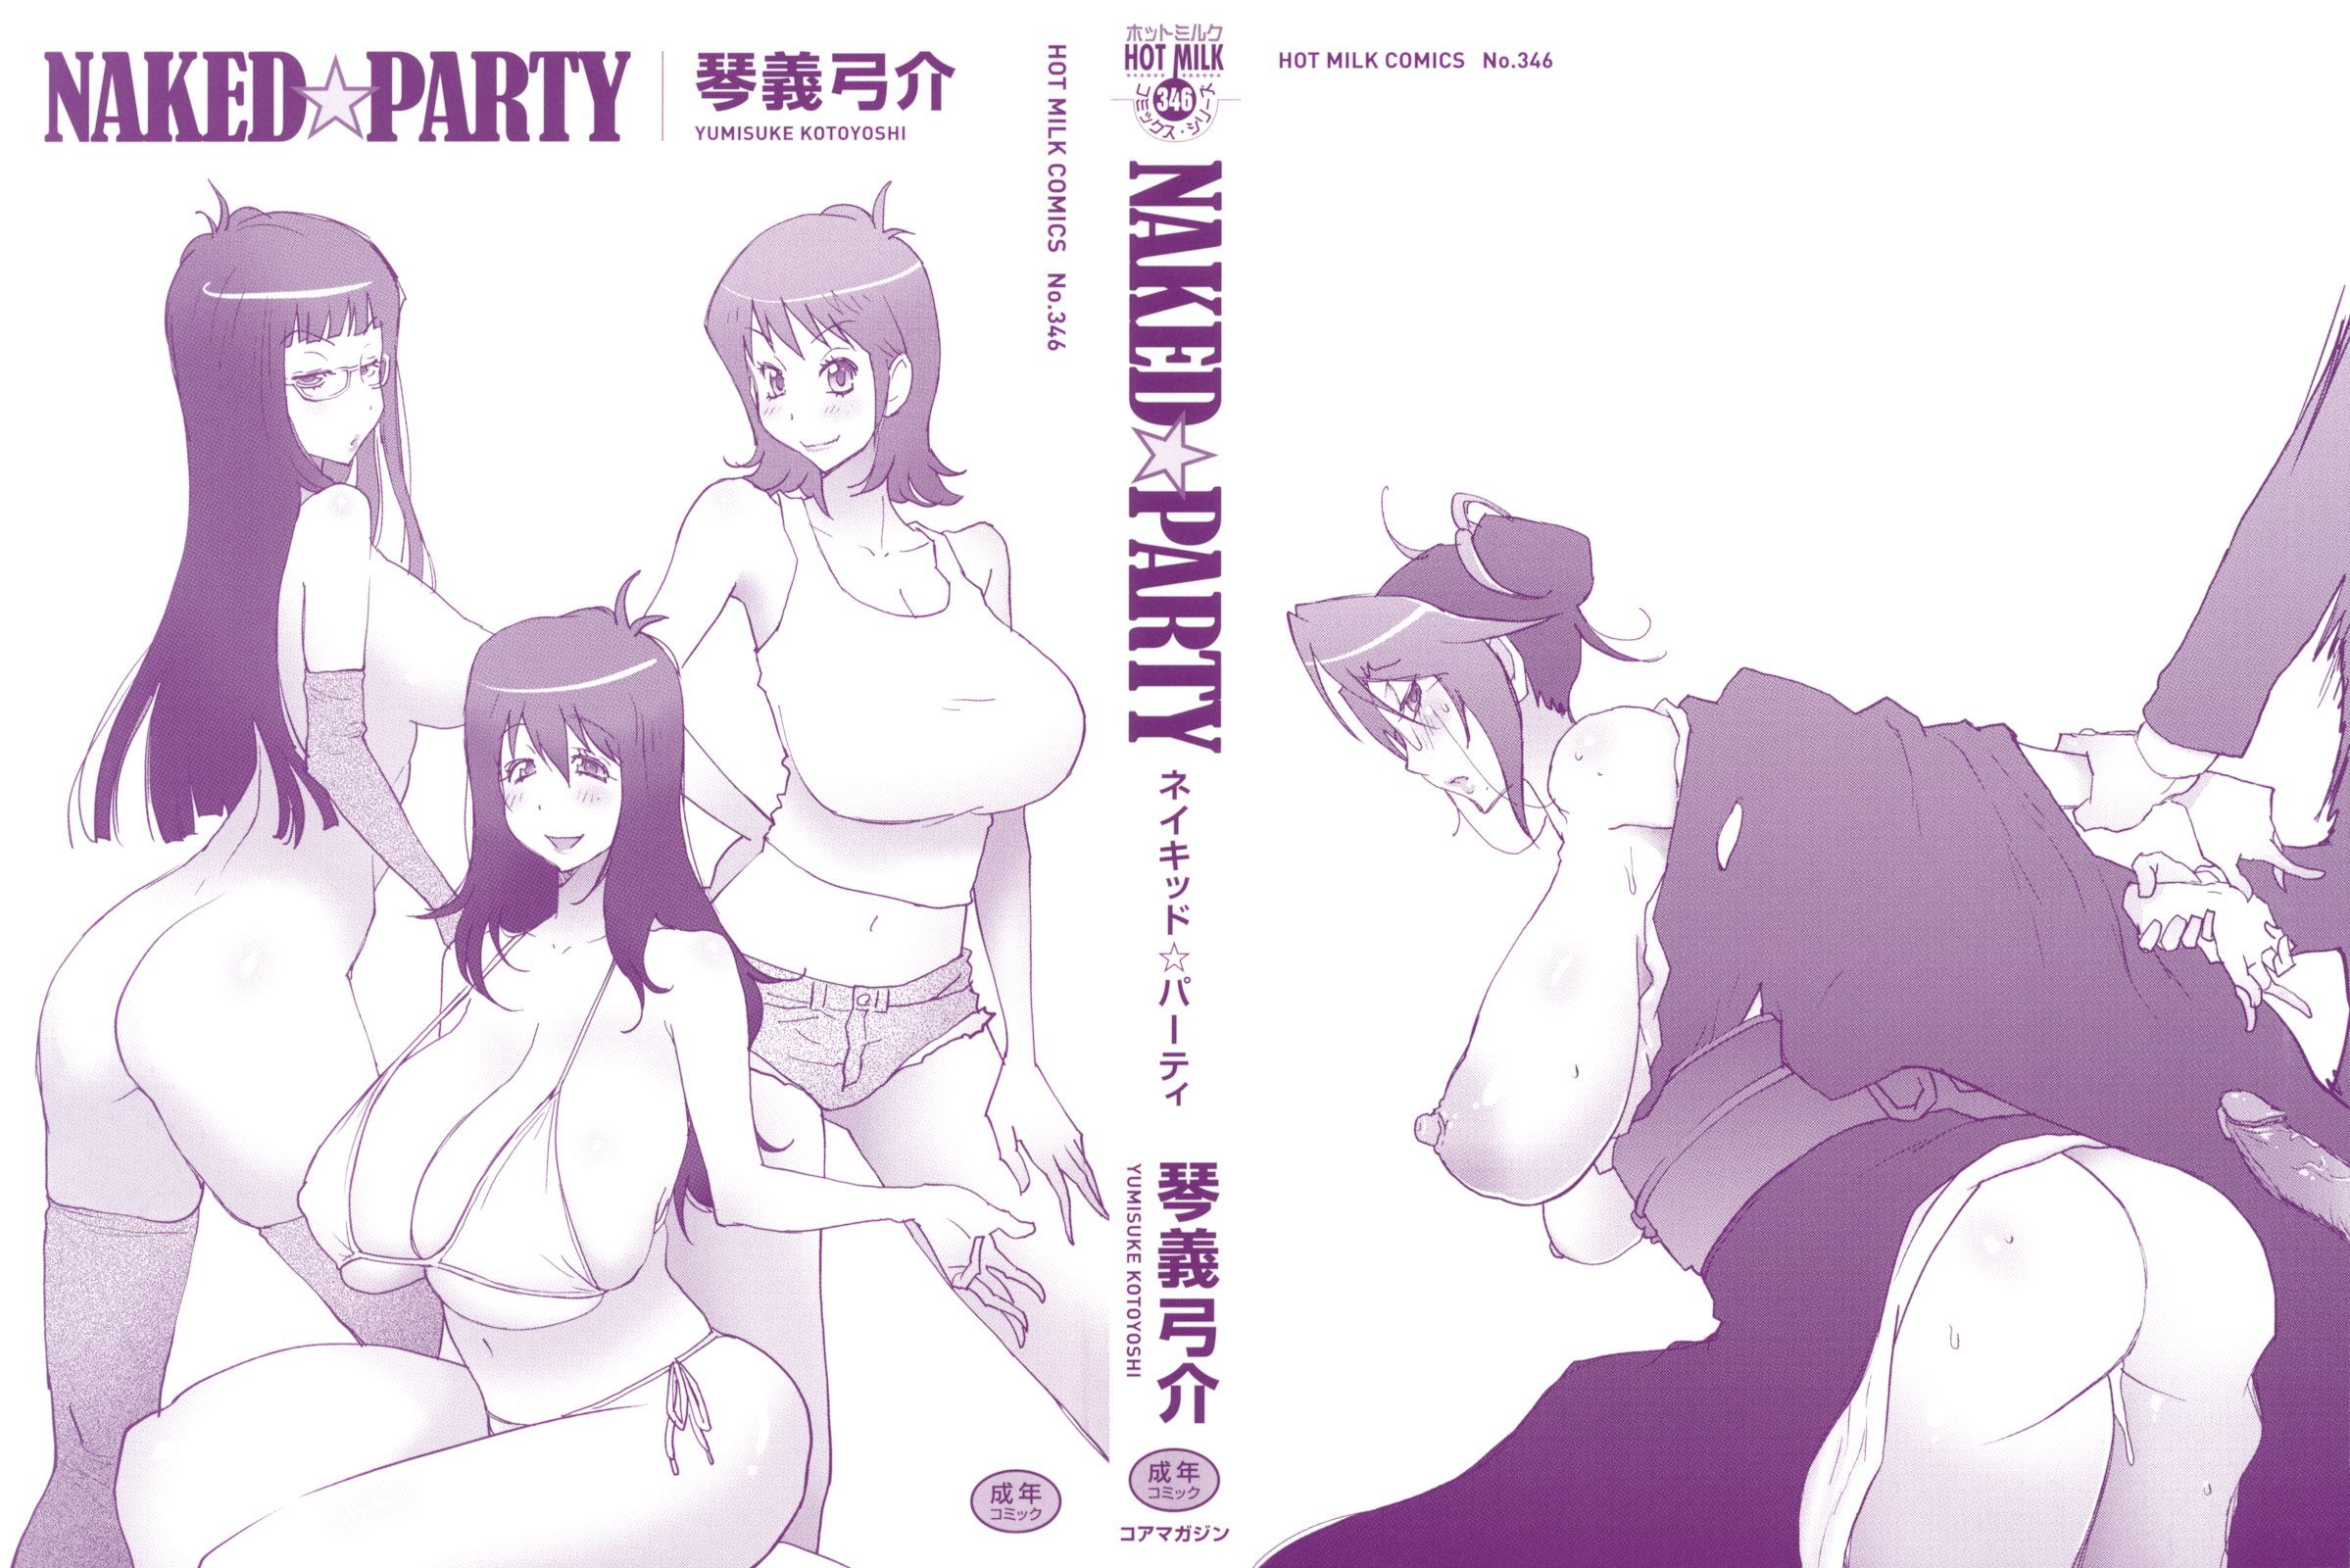 Naked party cap 1 - 2